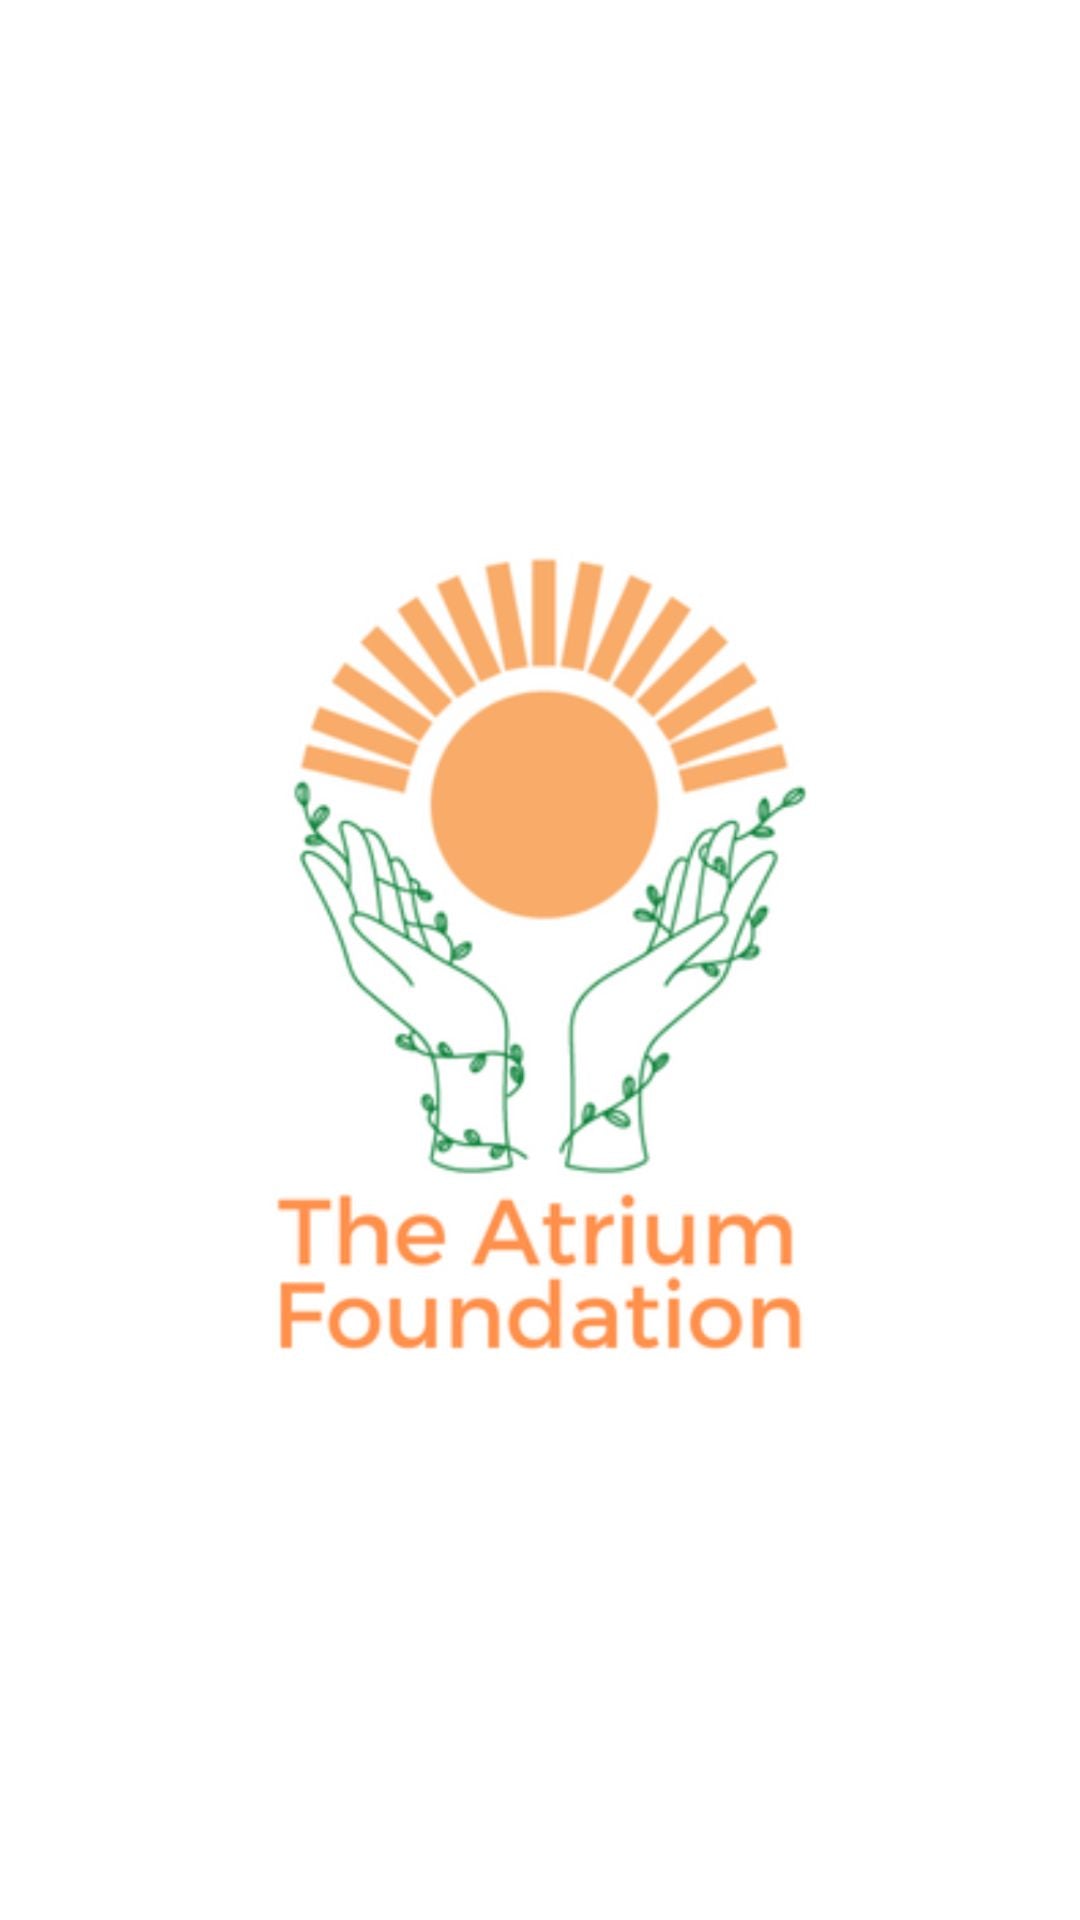 The Atrium Foundation logo with two hands holding up an orange sun